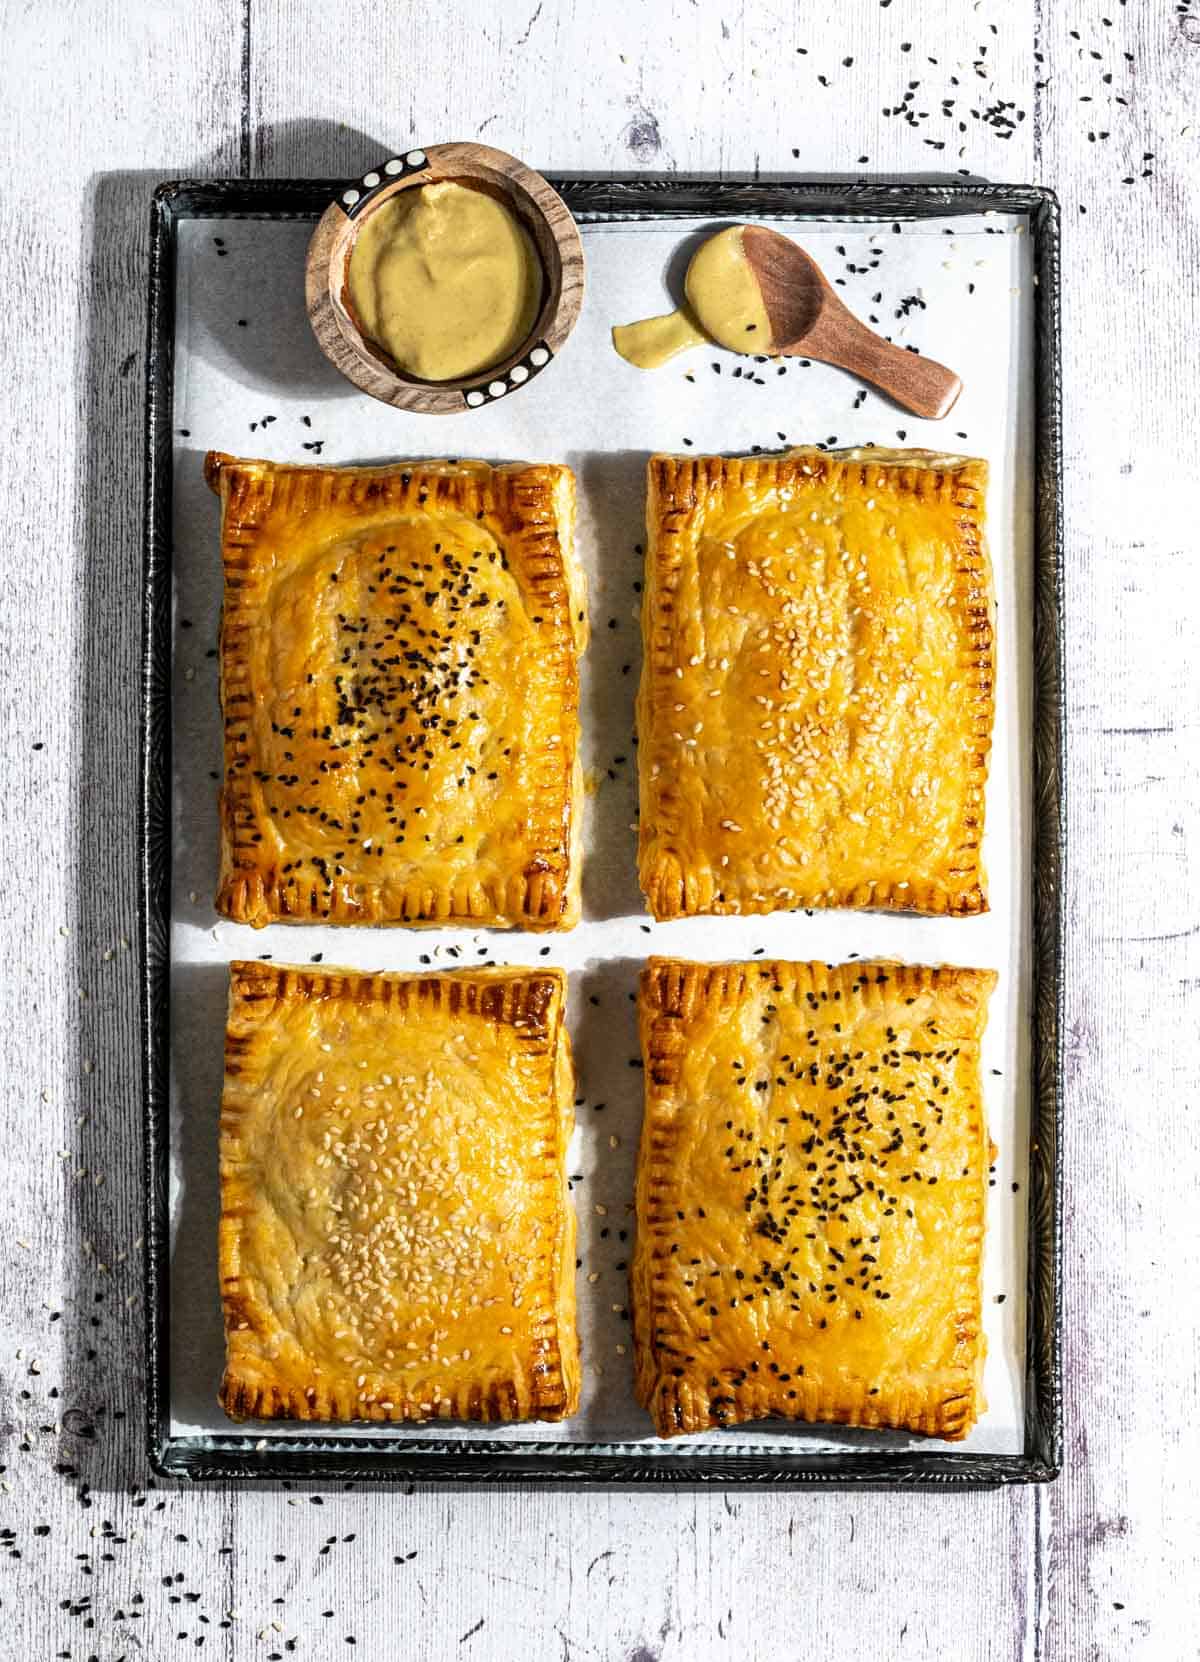 Four cheese and onion pasties on a baking sheet with a small bowl of mustard.